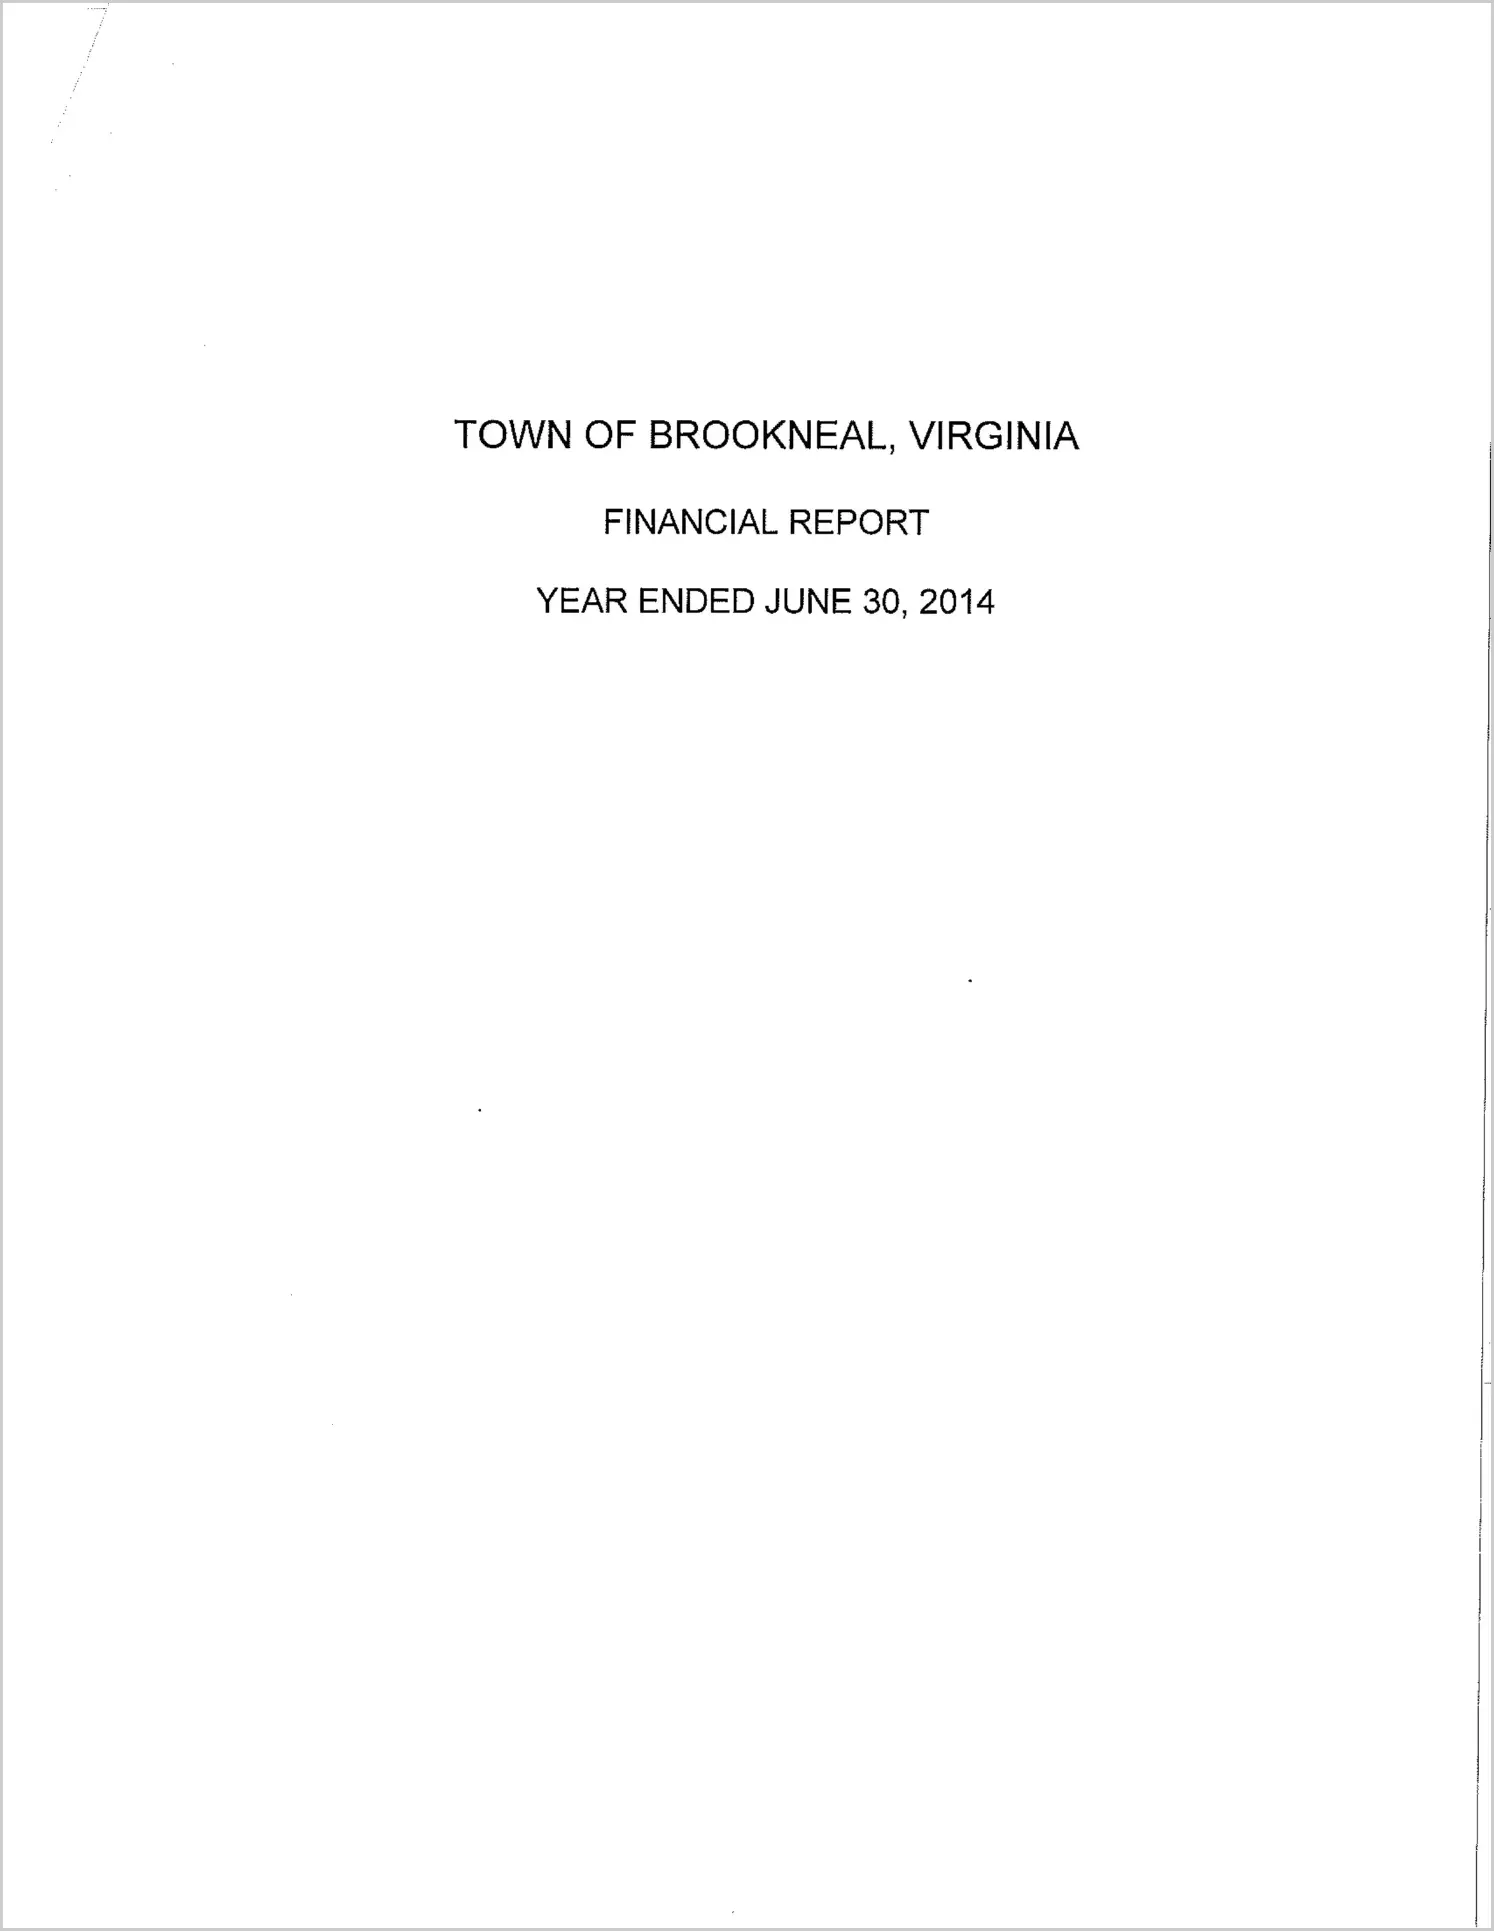 2014 Annual Financial Report for Town of Brookneal